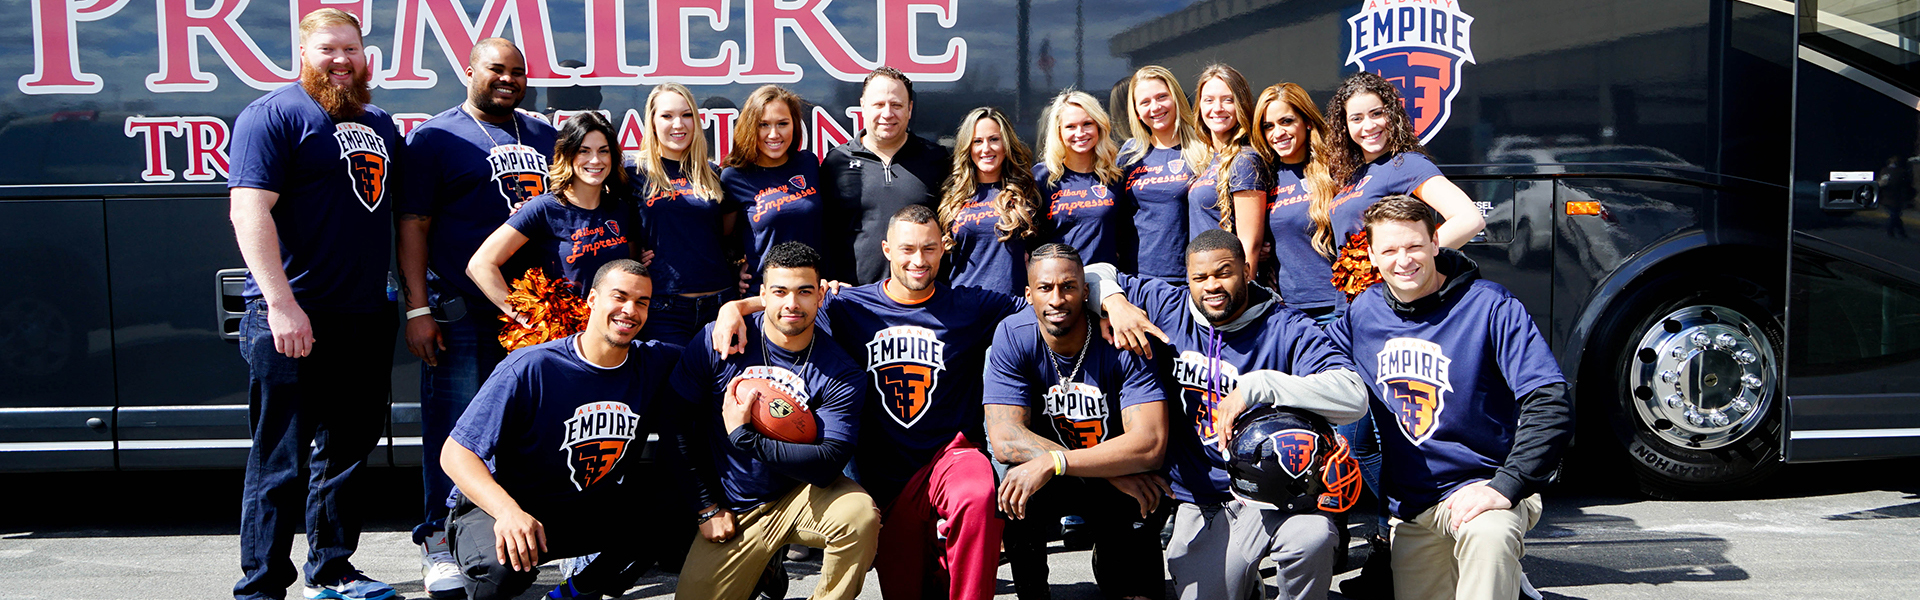 Albany Empire team in front of Premiere bus